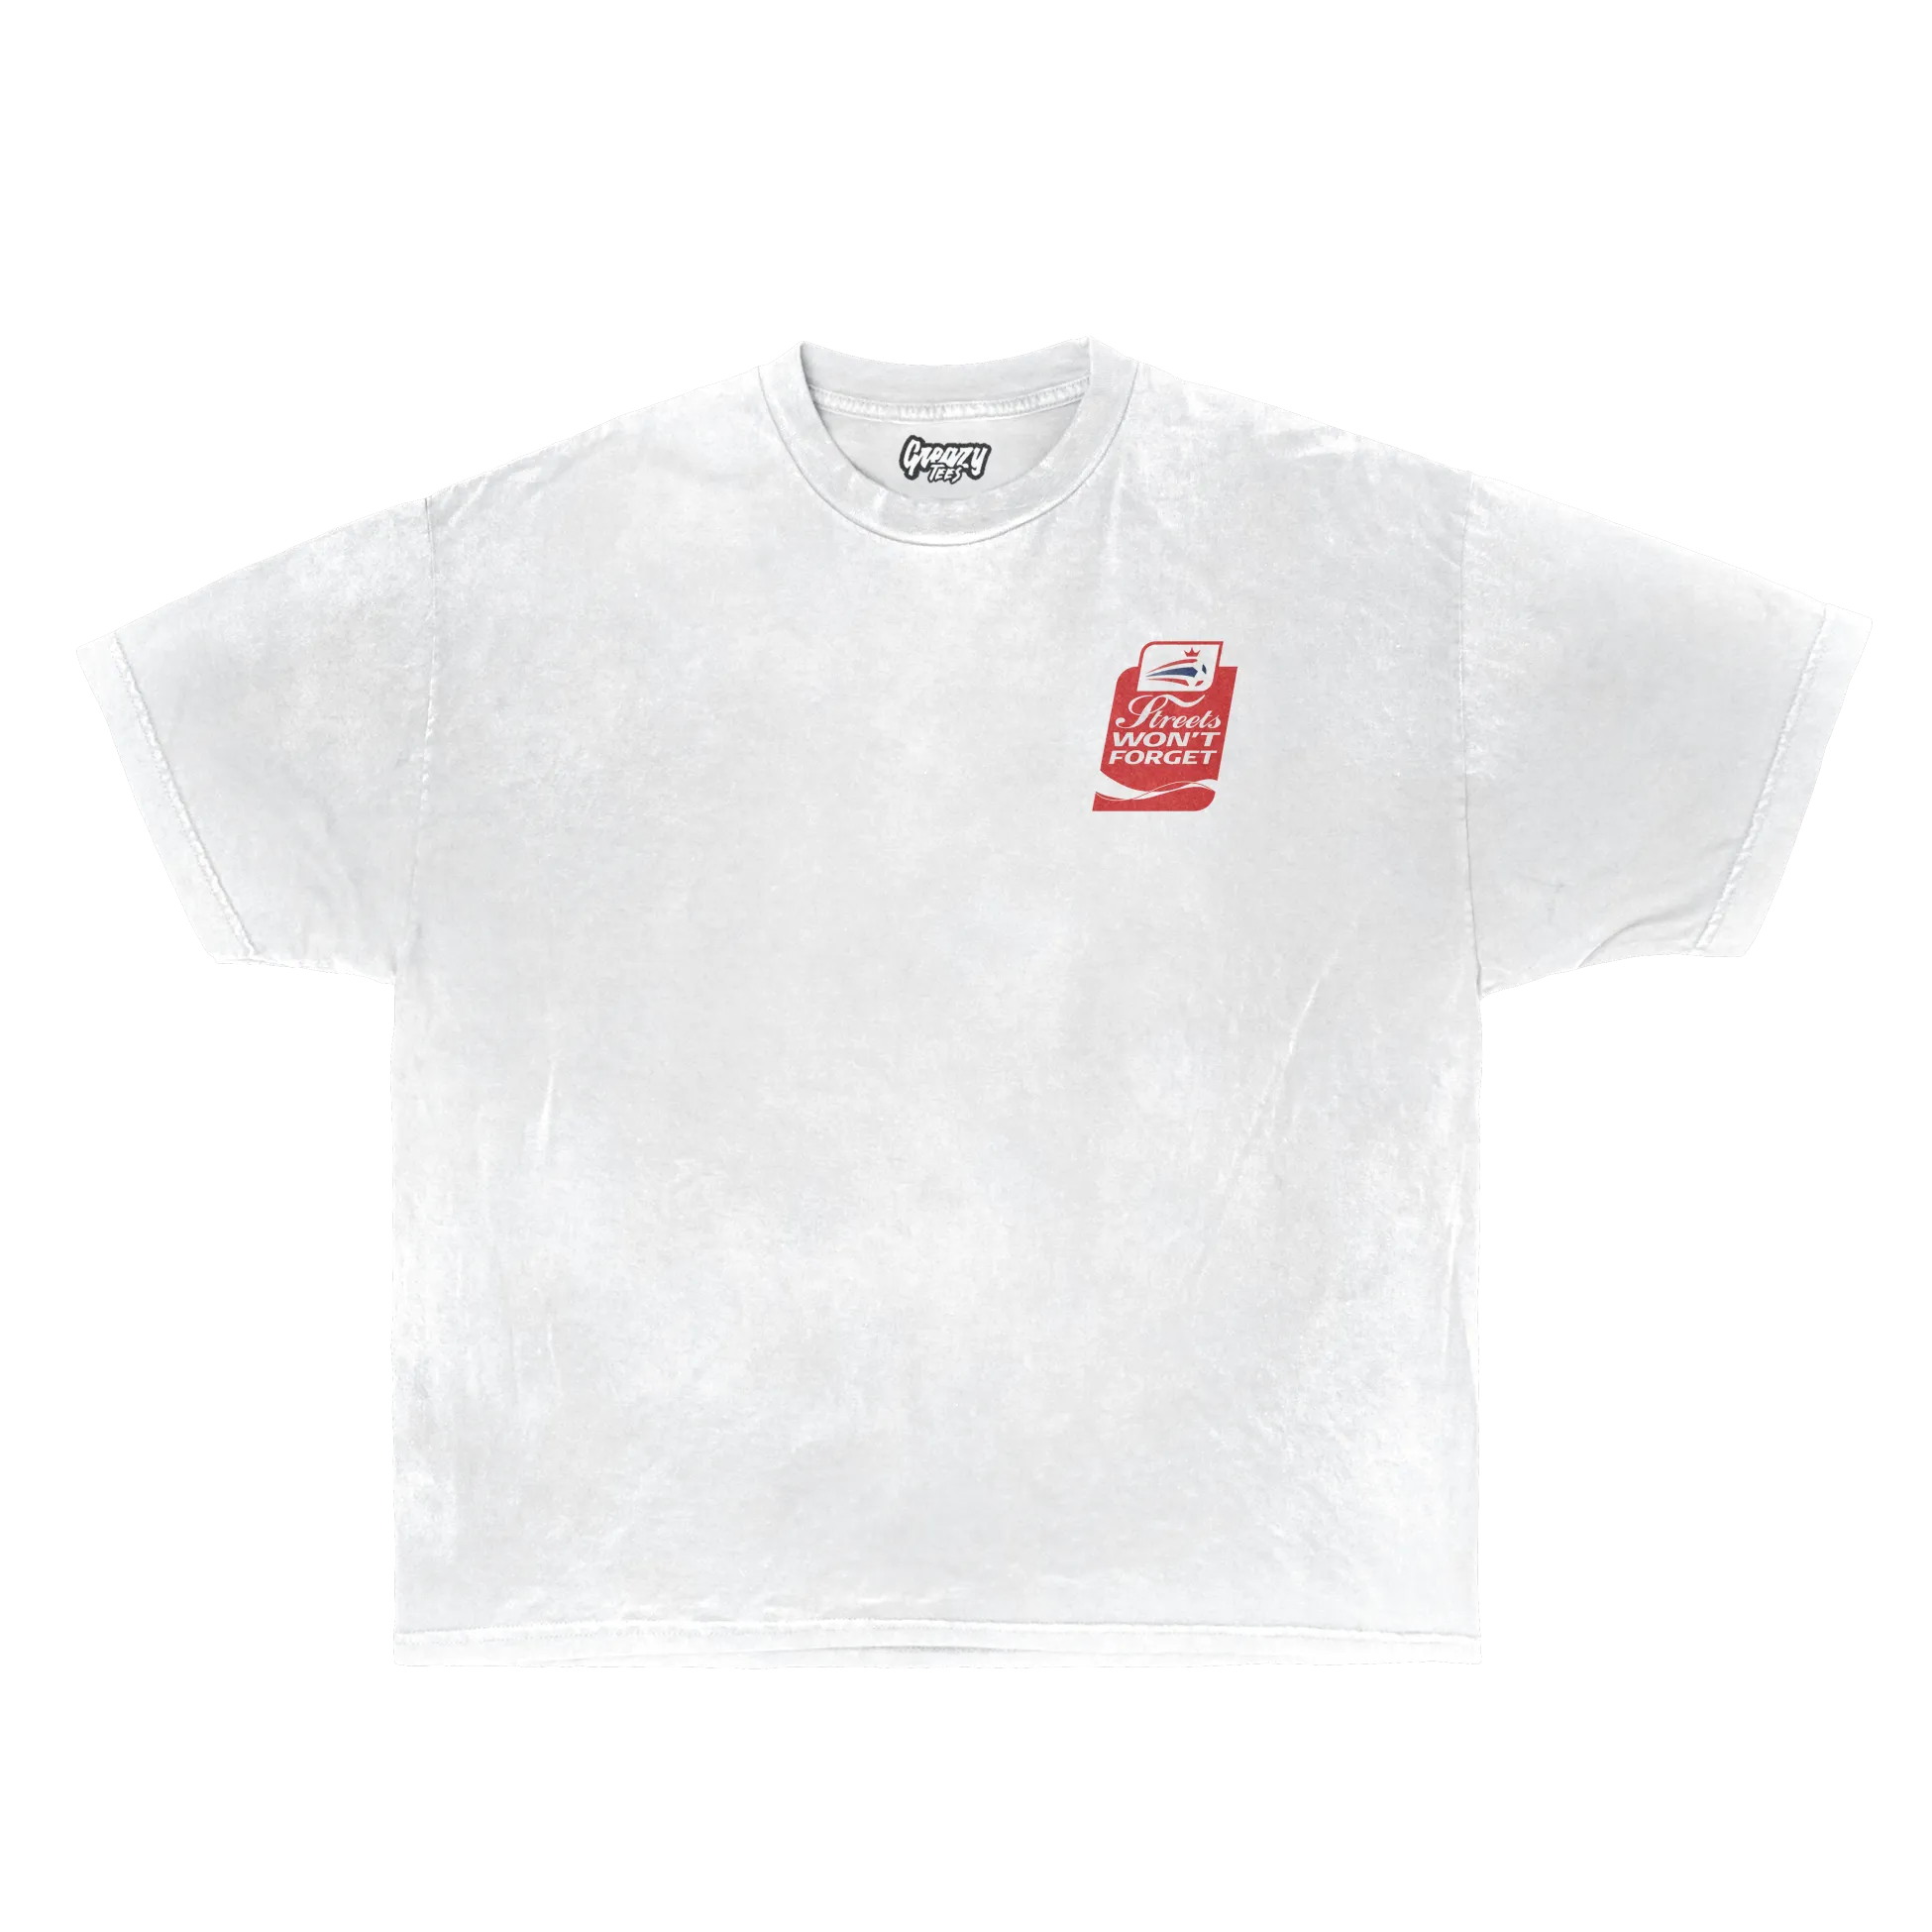 Coca Cola Streets Won't Forget Tee Tee Greazy Tees XS White Oversized